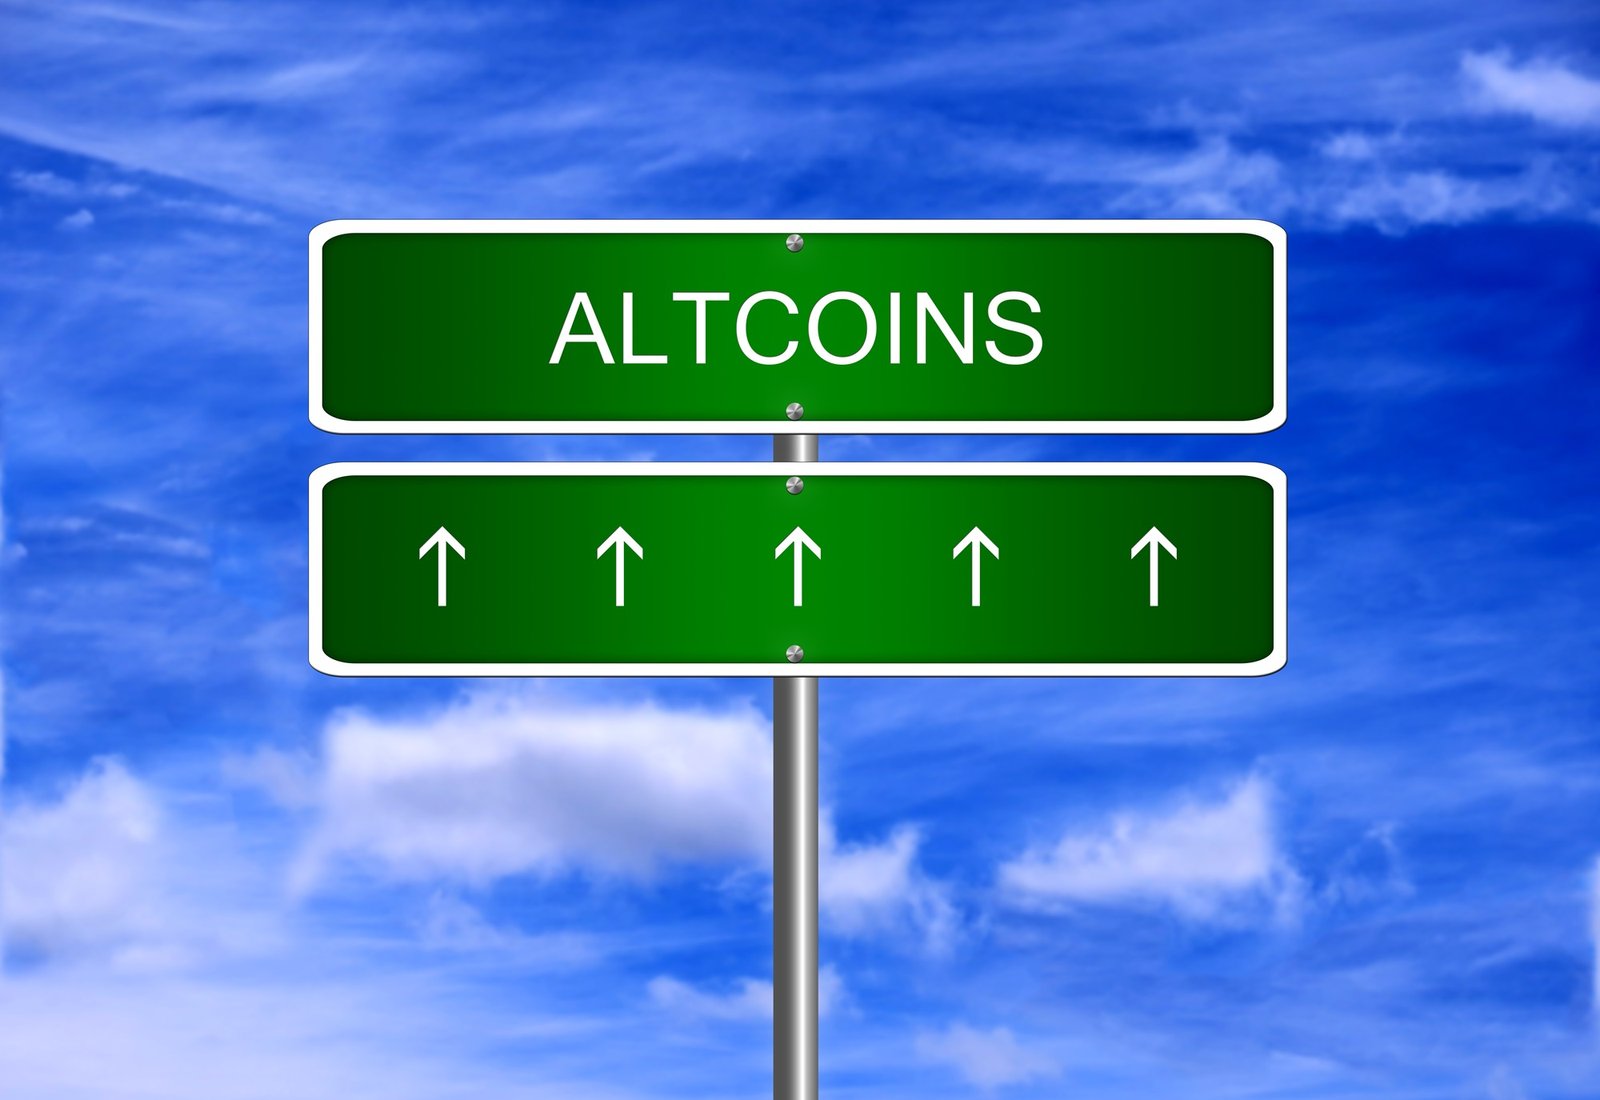 These Altcoins Are The Ones To Pay Attention To: Santiment